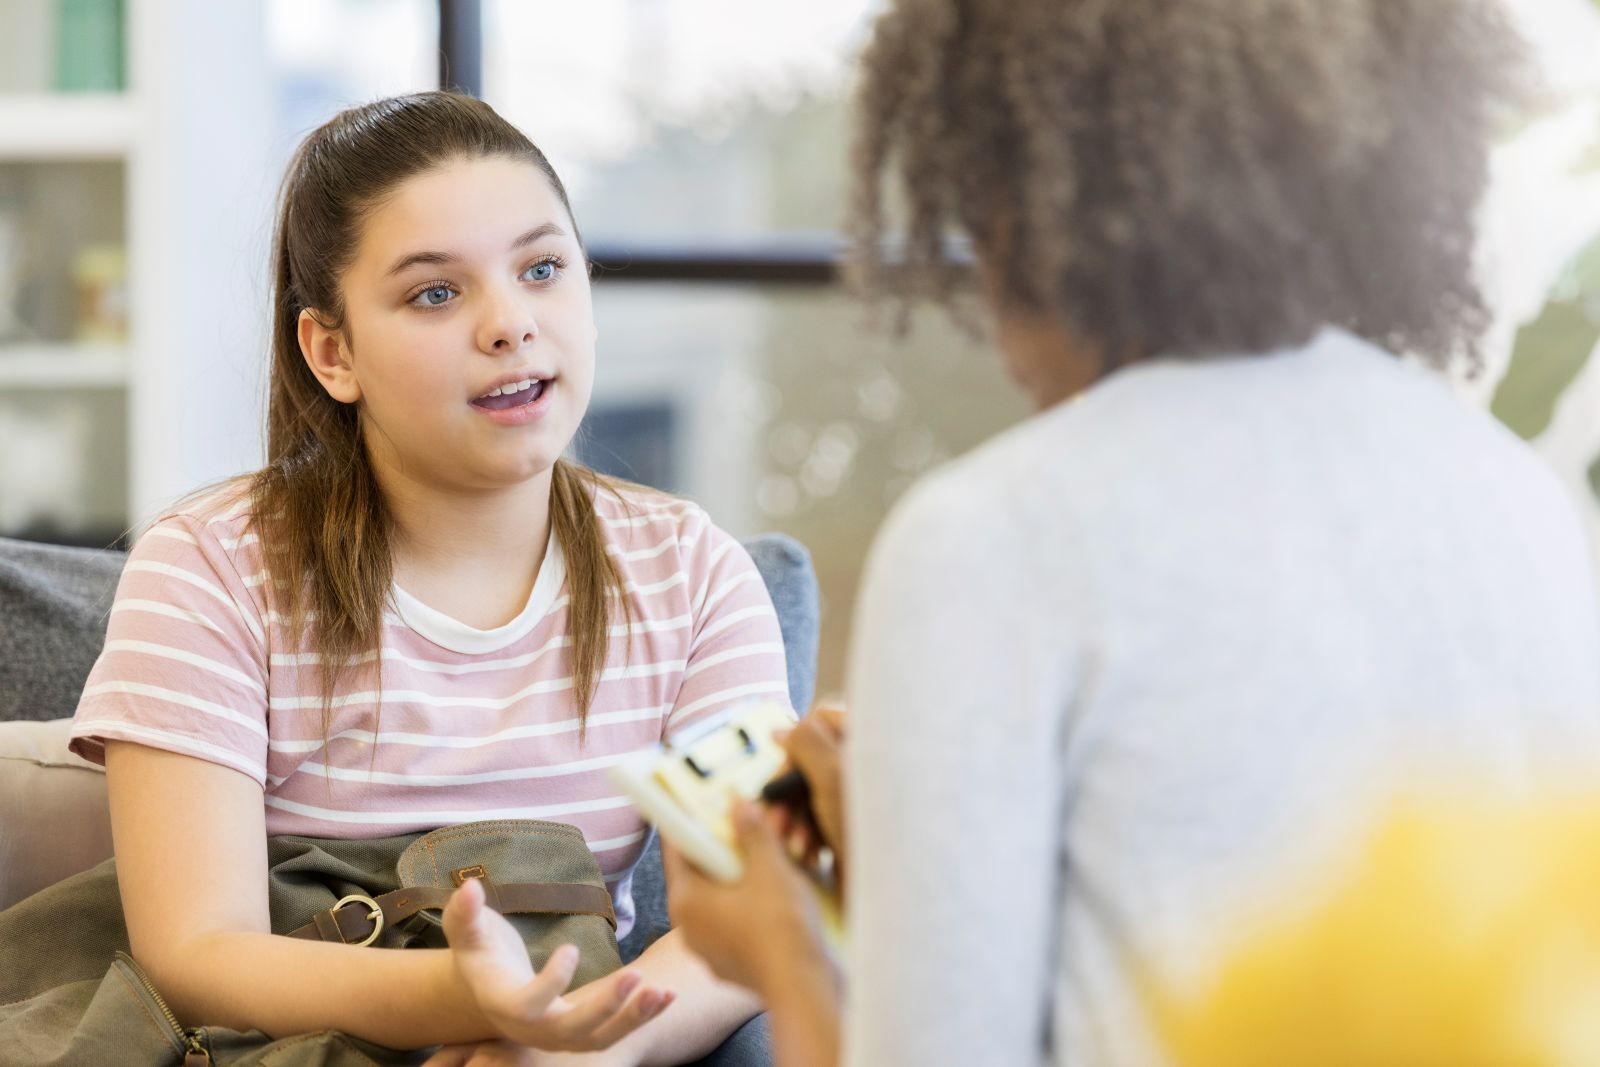 The Gateway Center’s mission is to ensure that children in abusive situations are removed safely and treated with the proper legal, mental and emotional care that they need to overcome their trauma. Click to learn more.